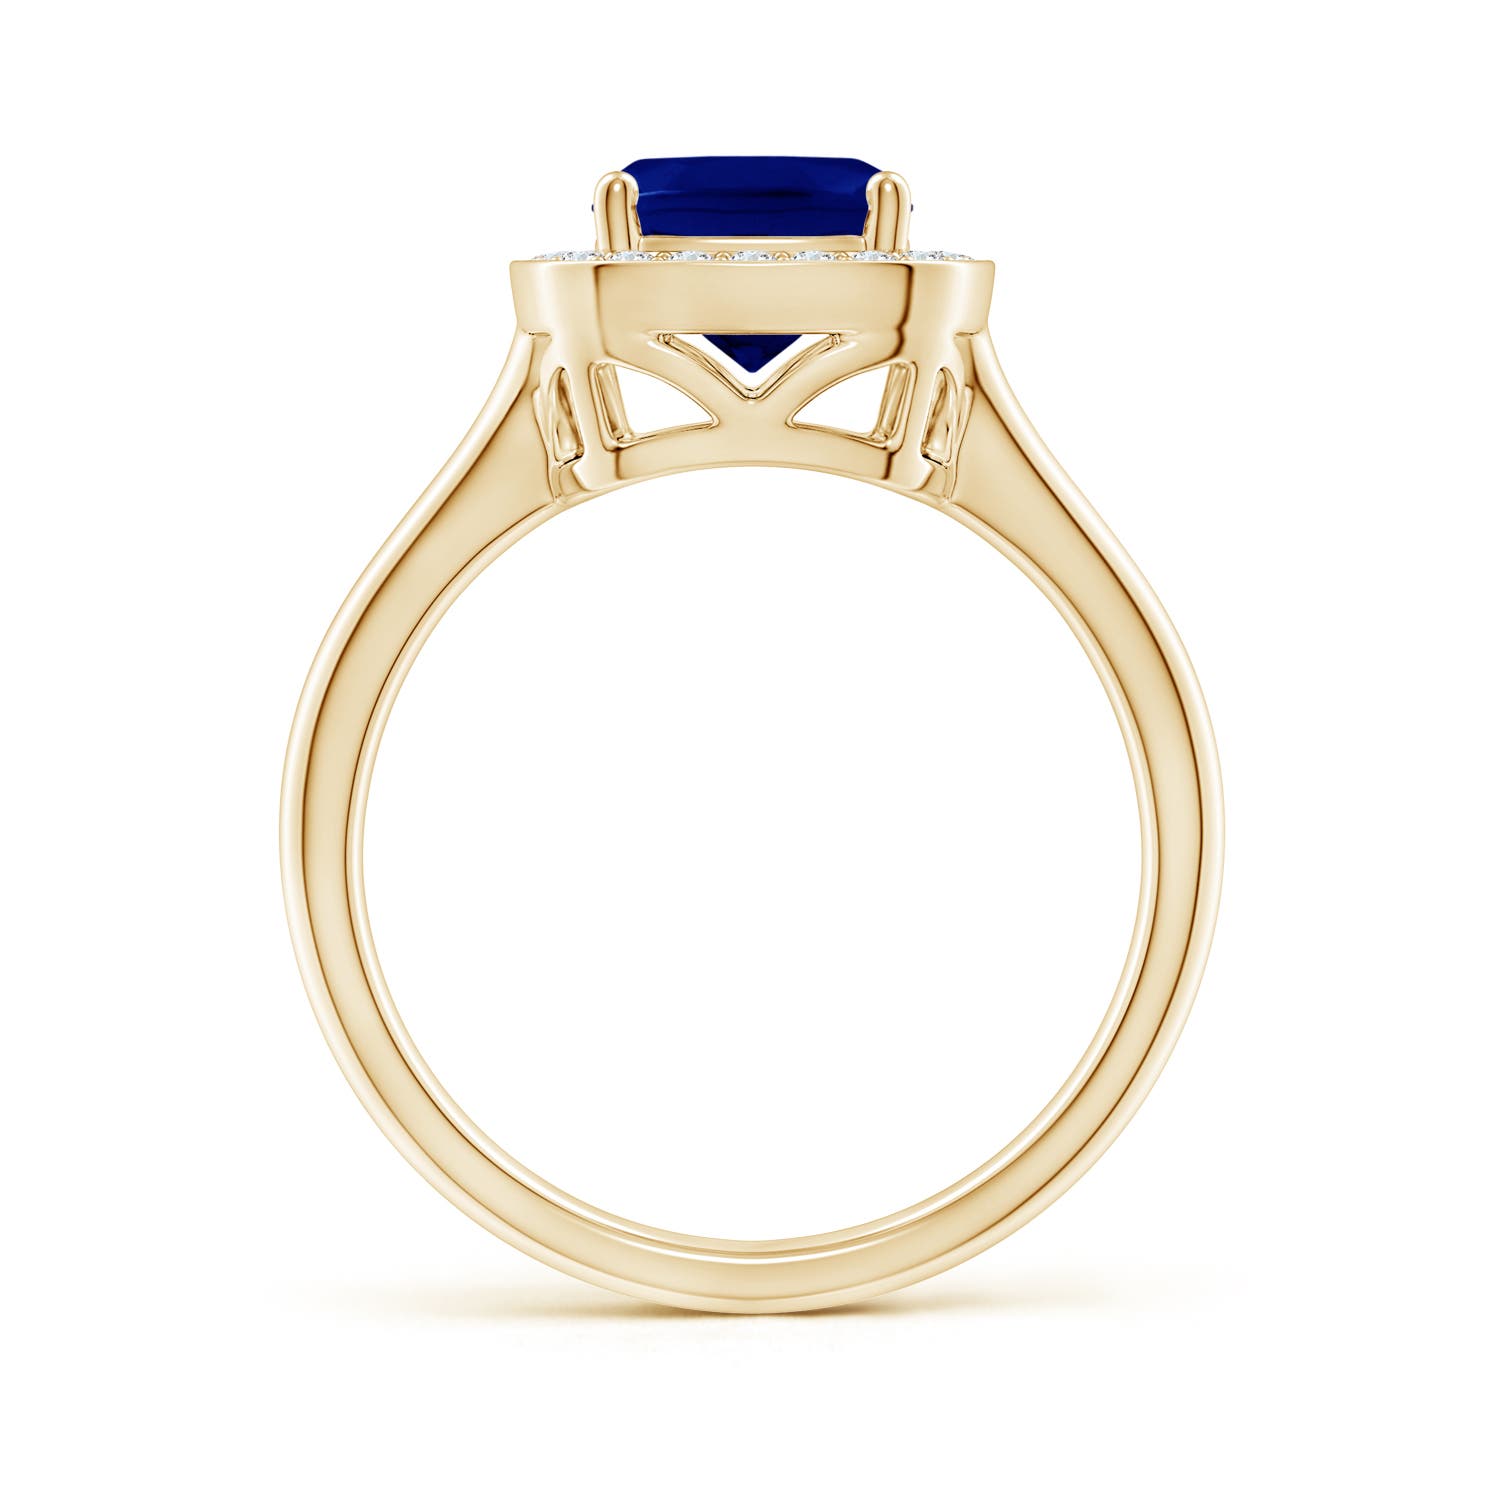 AAA - Blue Sapphire / 1.18 CT / 14 KT Yellow Gold